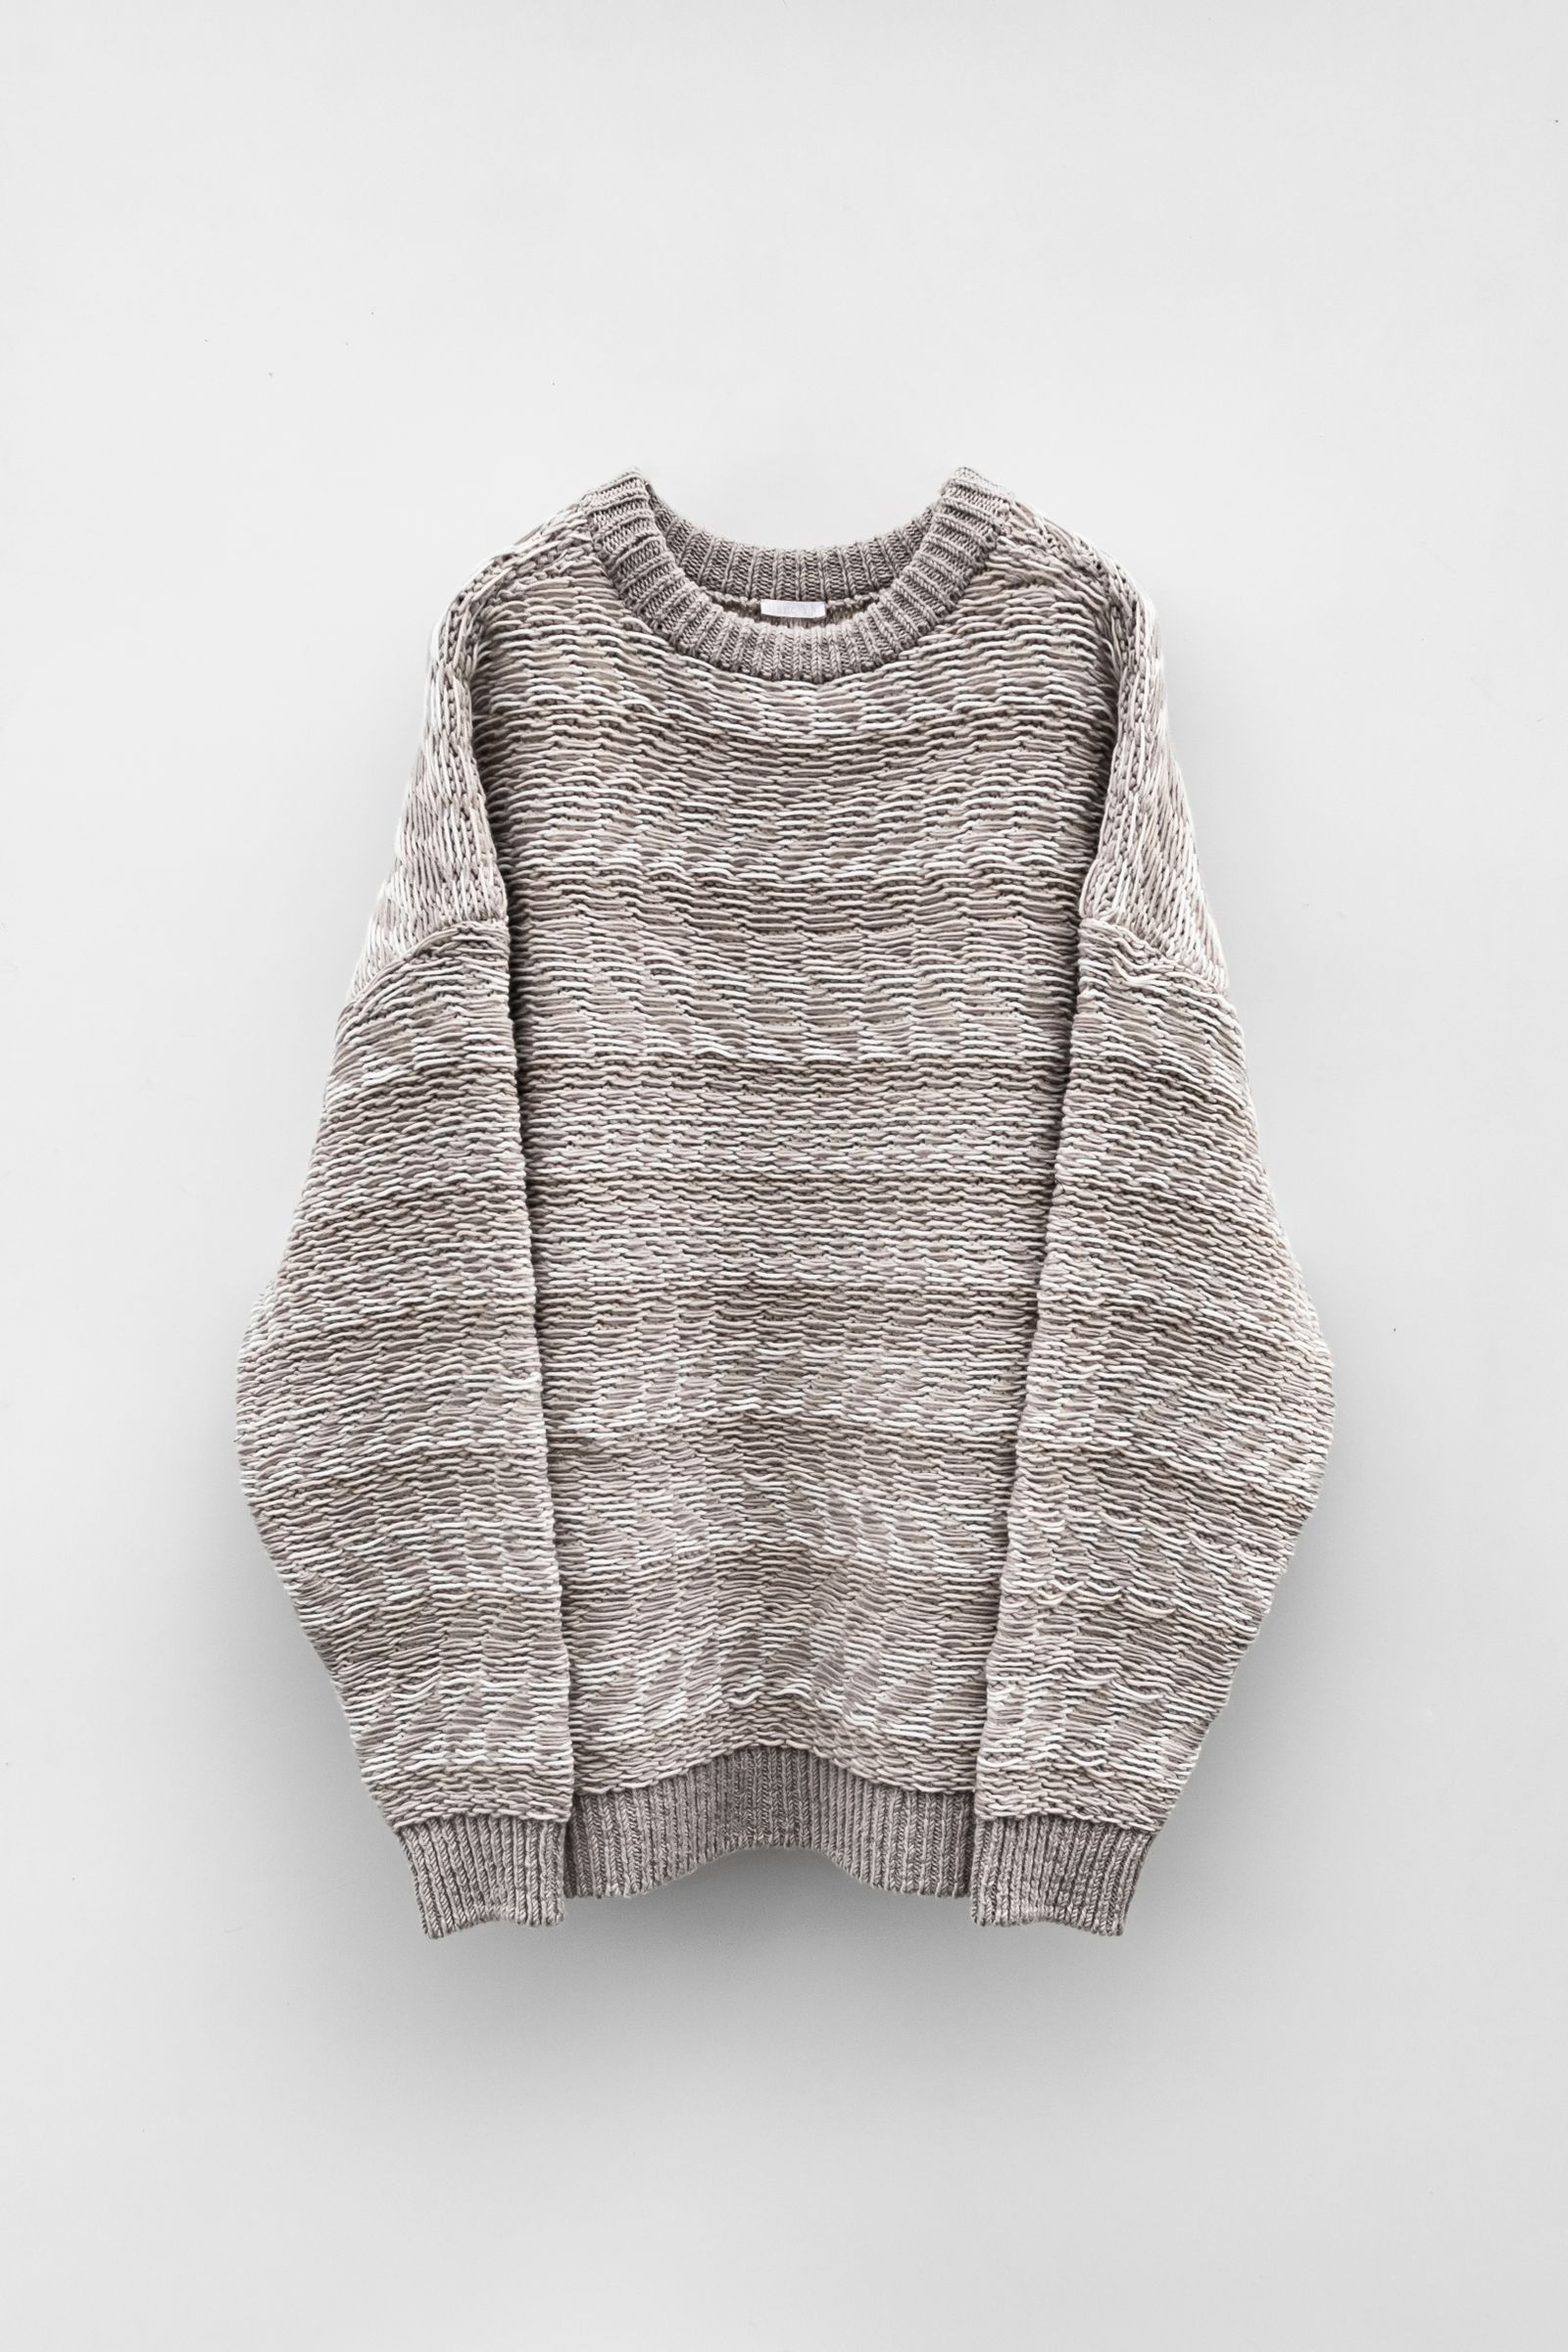 Blanc YM - Inside out Knit Pullover / Gray | Retikle Online Store